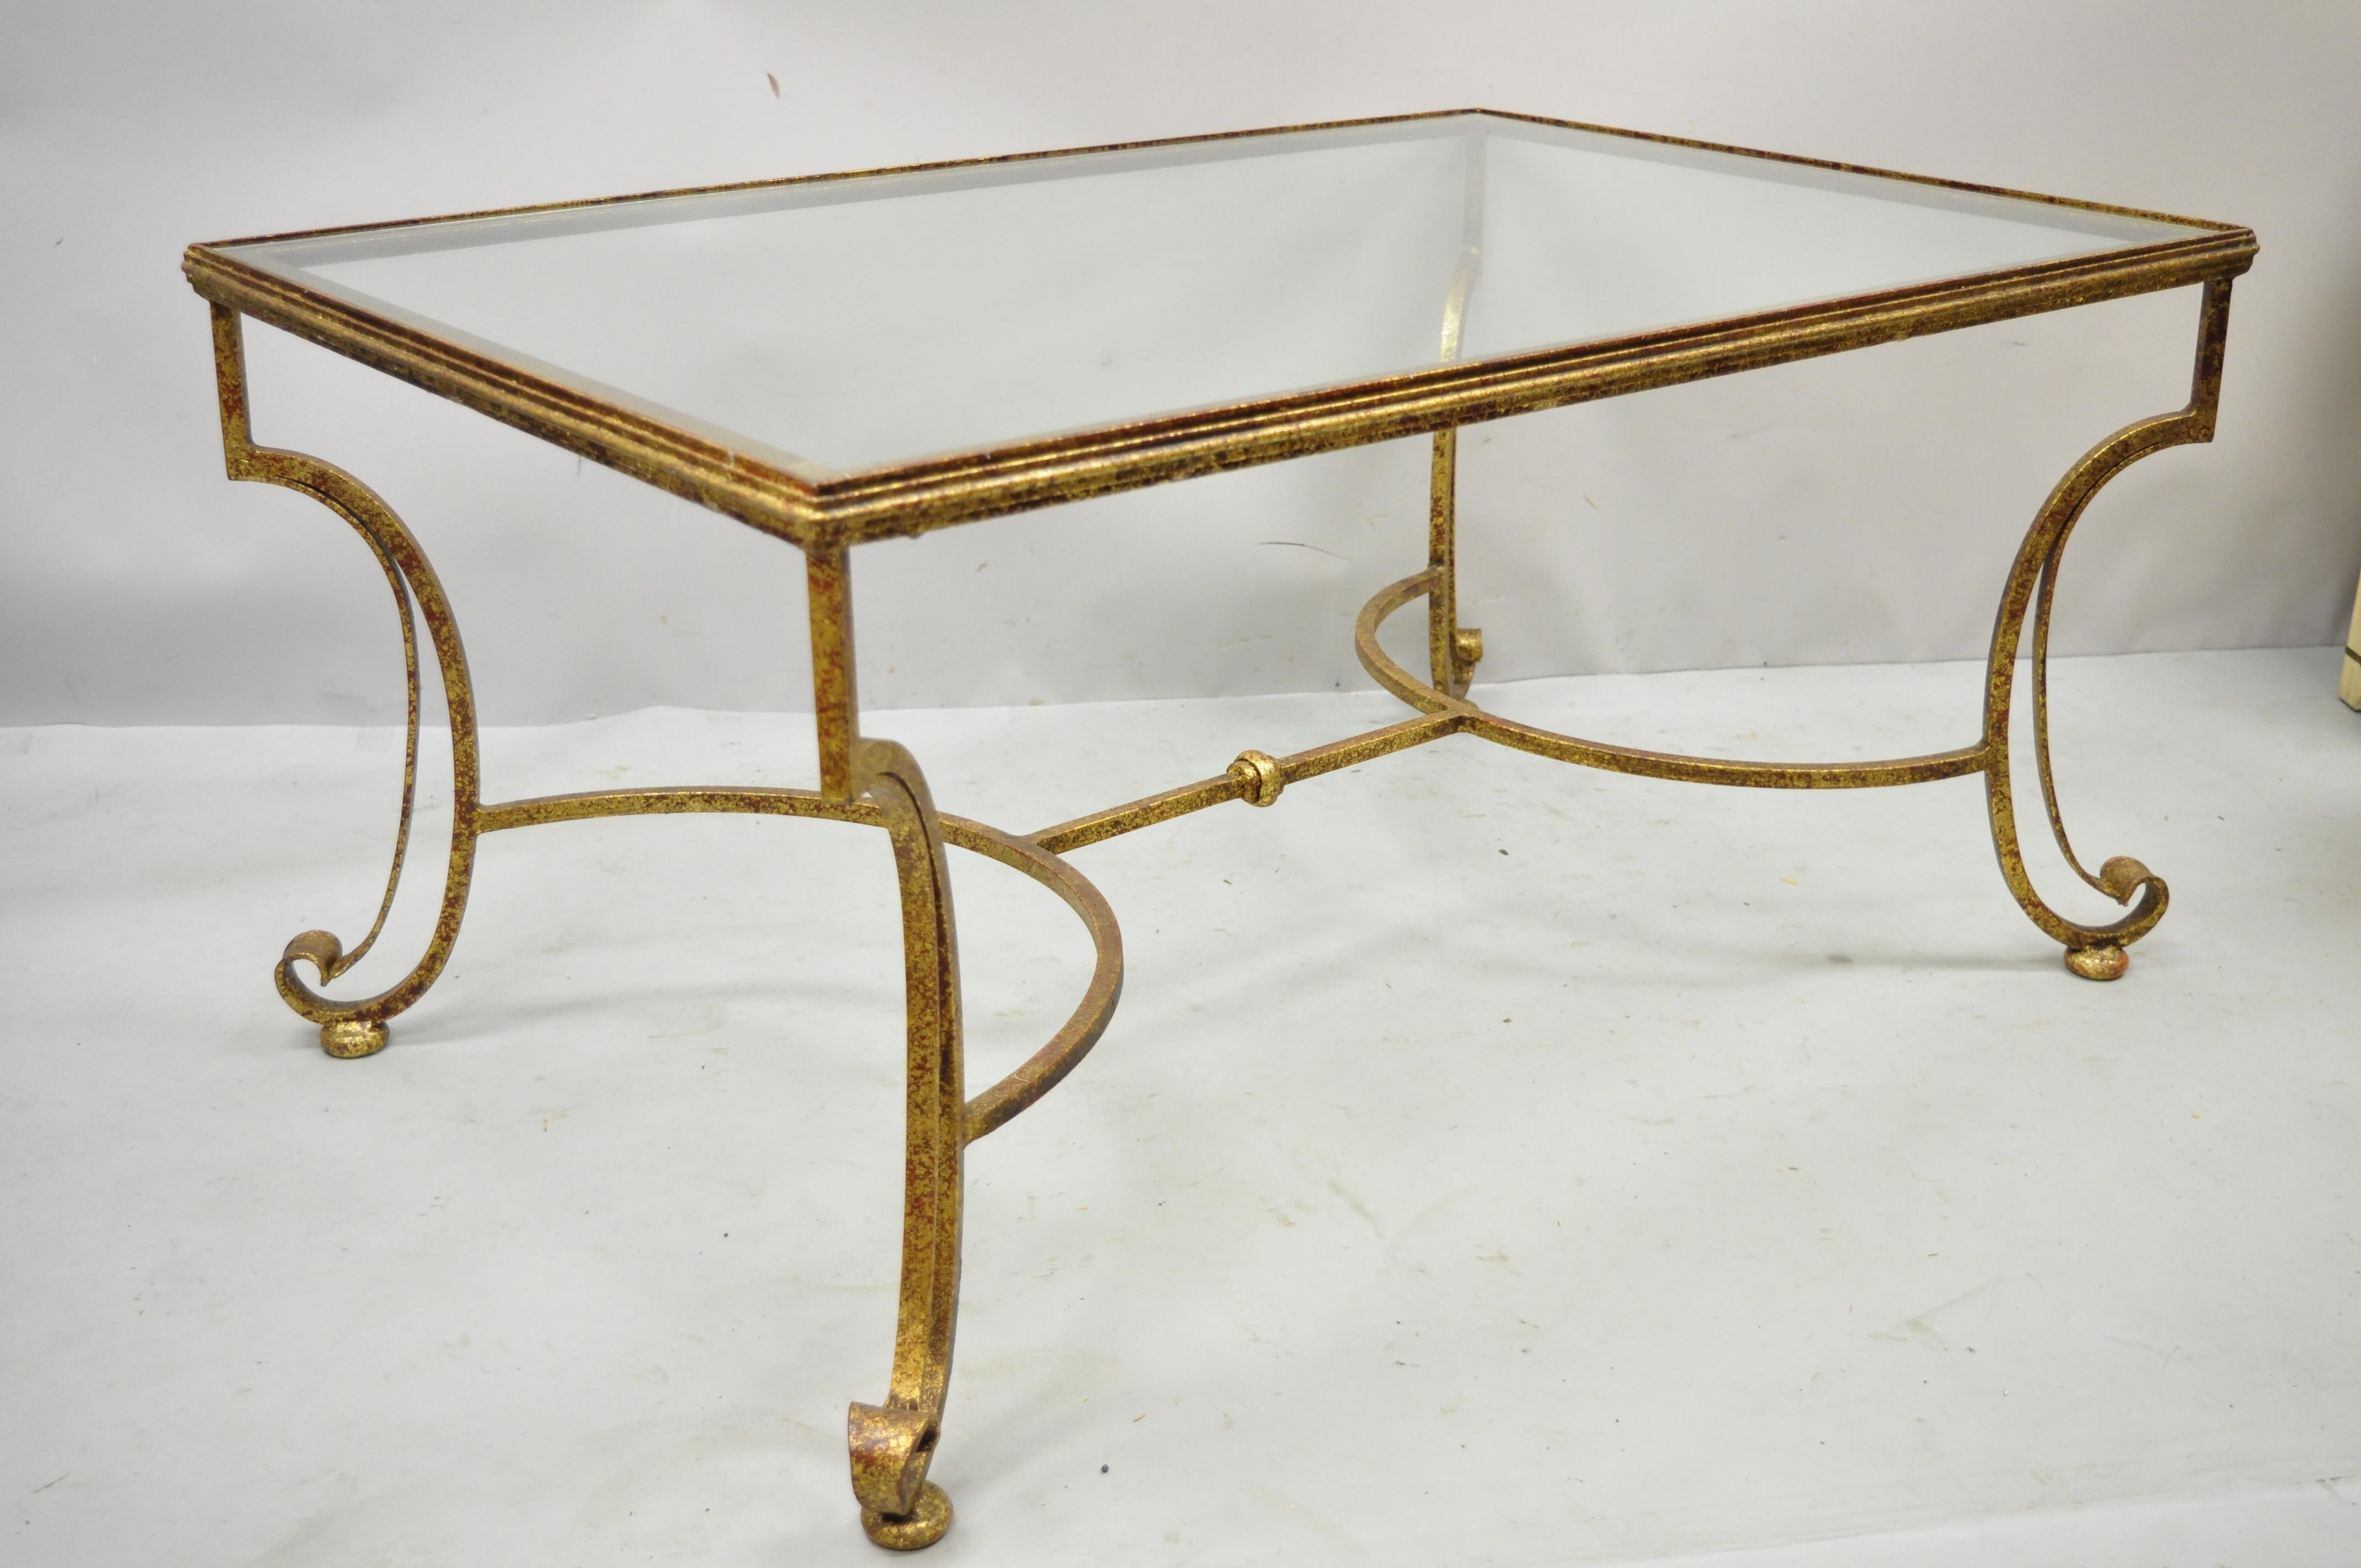 Gold gilt iron scroll glass top Italian Hollywood Regency rectangular coffee table. Item features glass top, wrought iron construction, distressed gold gilt finish, quality craftsmanship, sleek sculptural form. Circa Late 20th Century. Measurements: